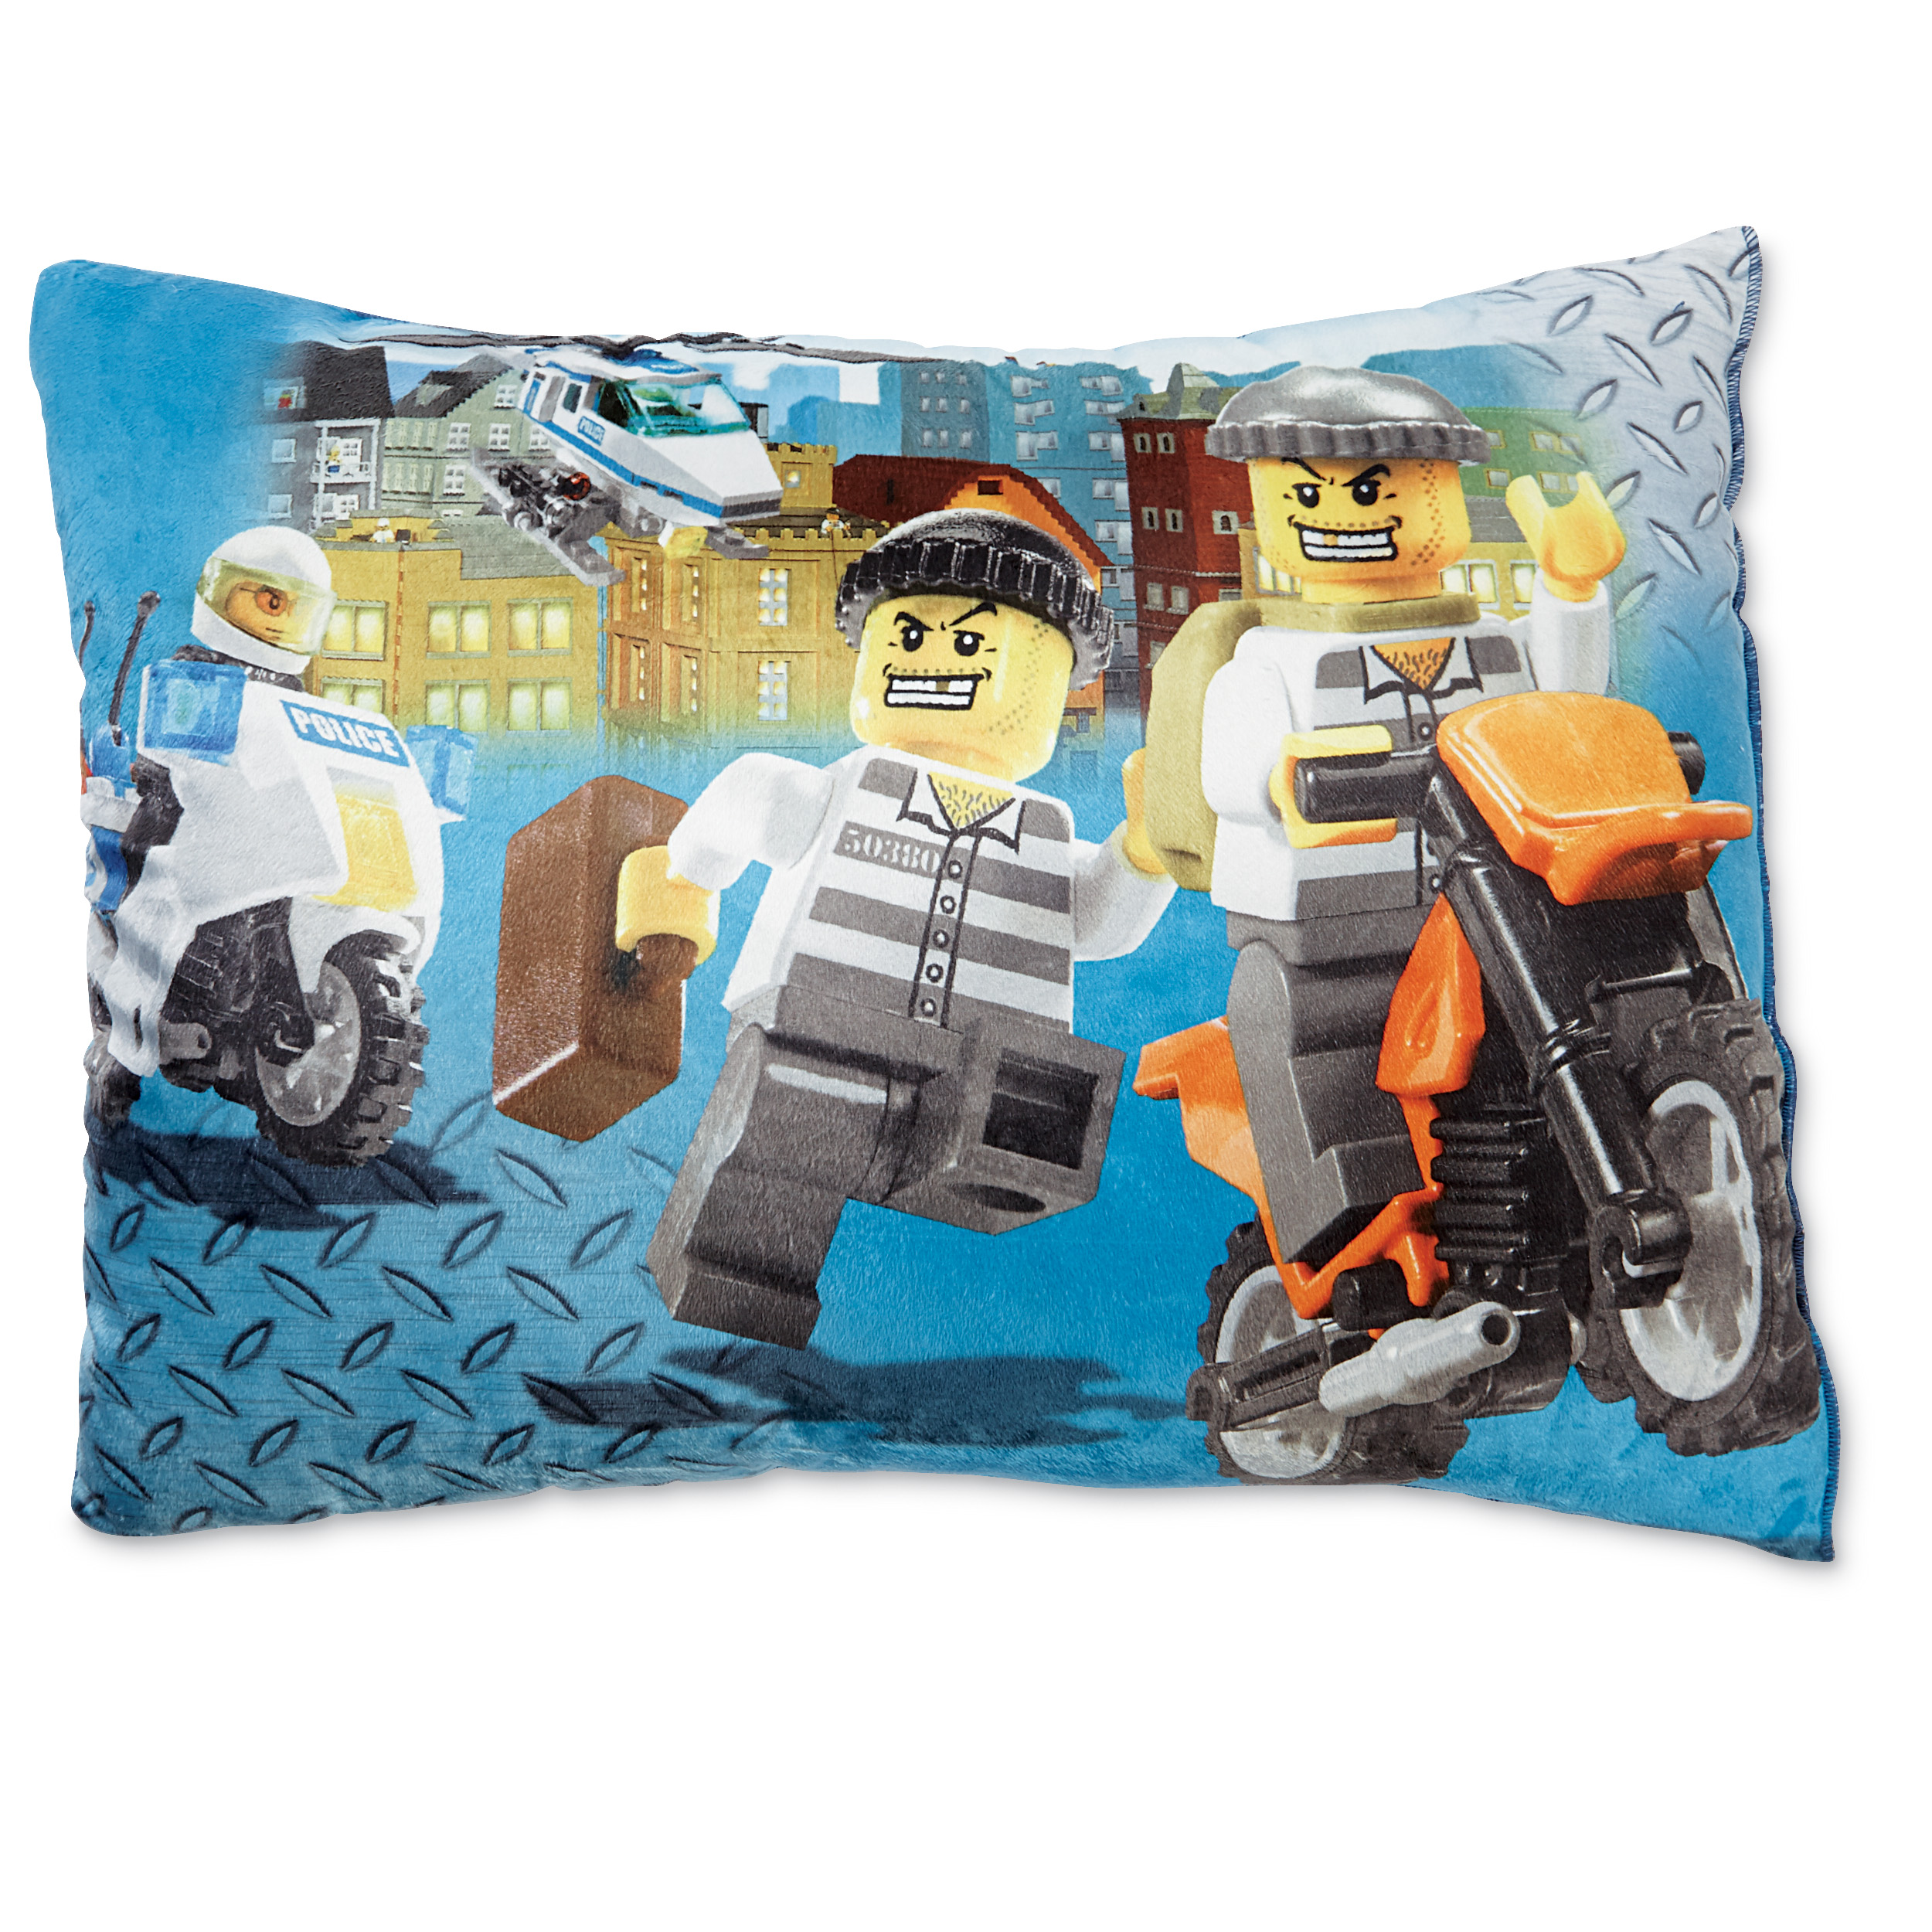 LEGO Police Bed Pillow City